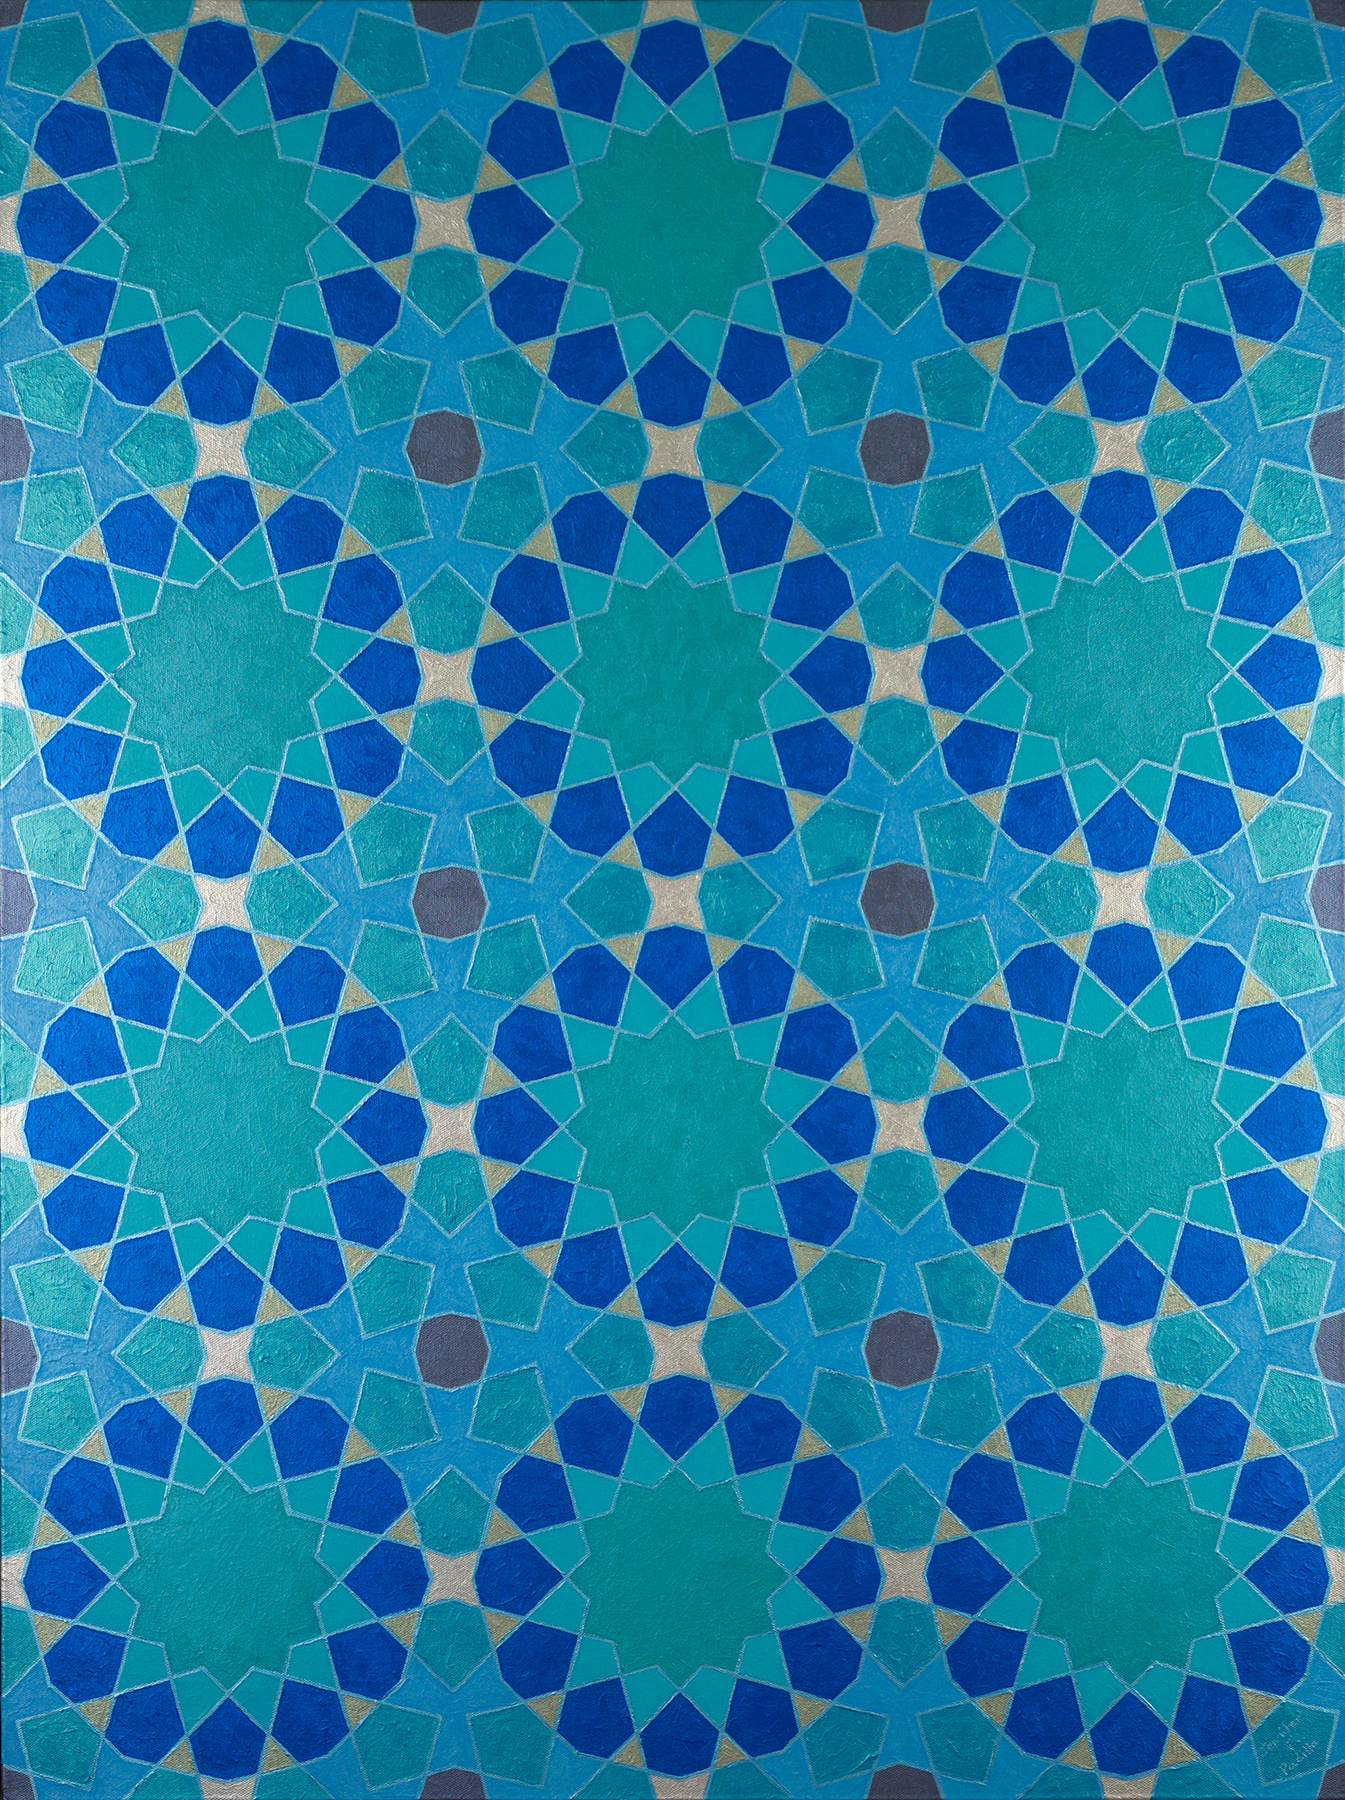 Painting of a repeated geometric motif from the Tomb of Bibi Jawindi